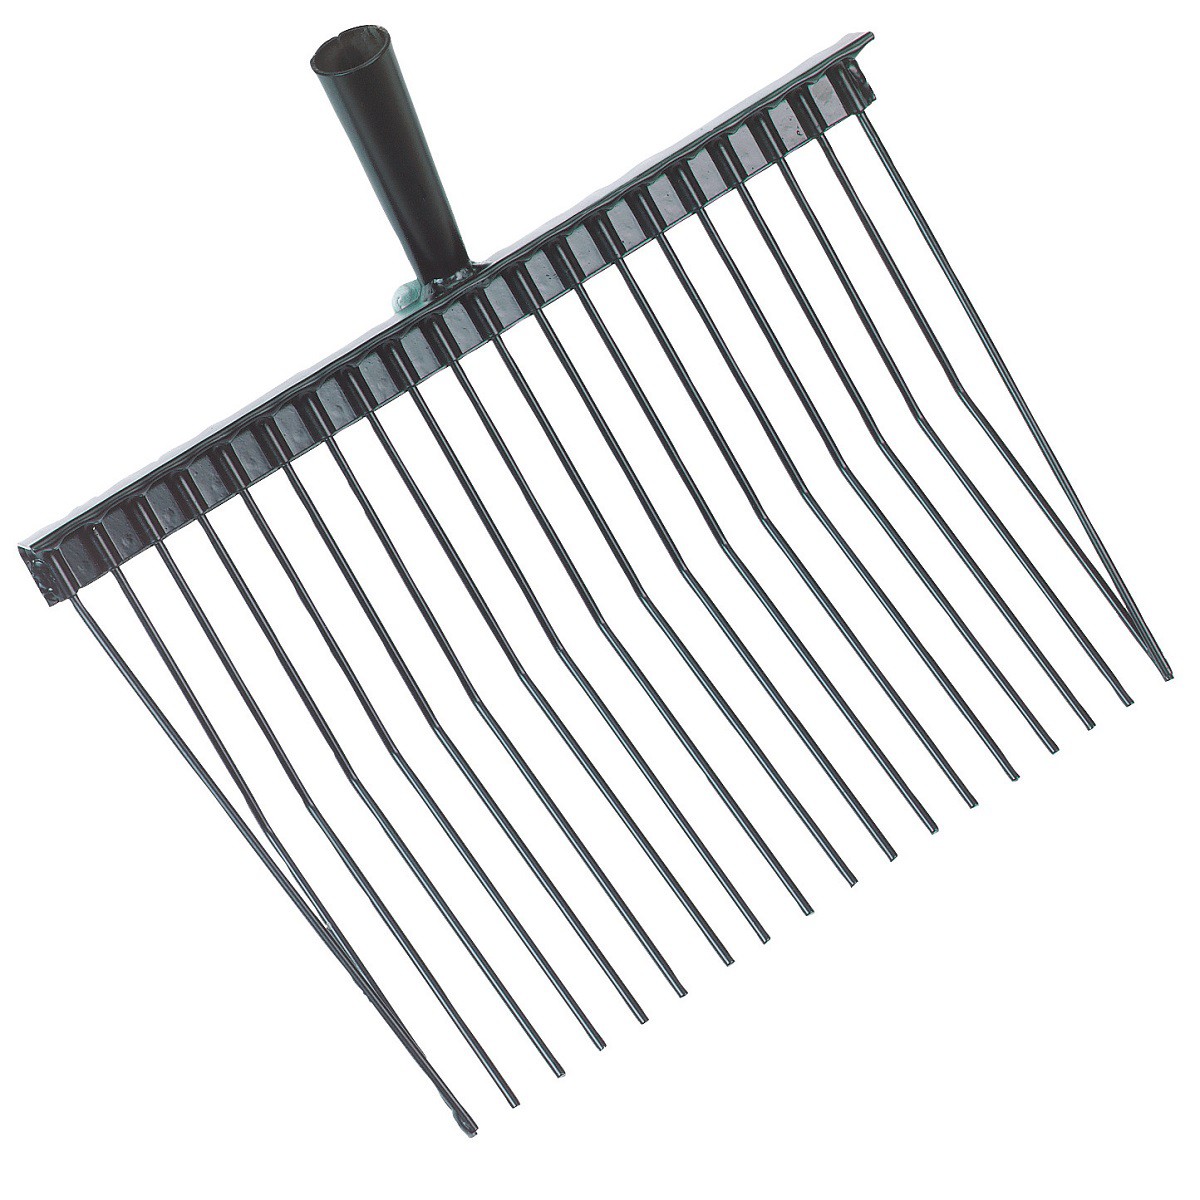 Litter fork metal 20 prongs without handle